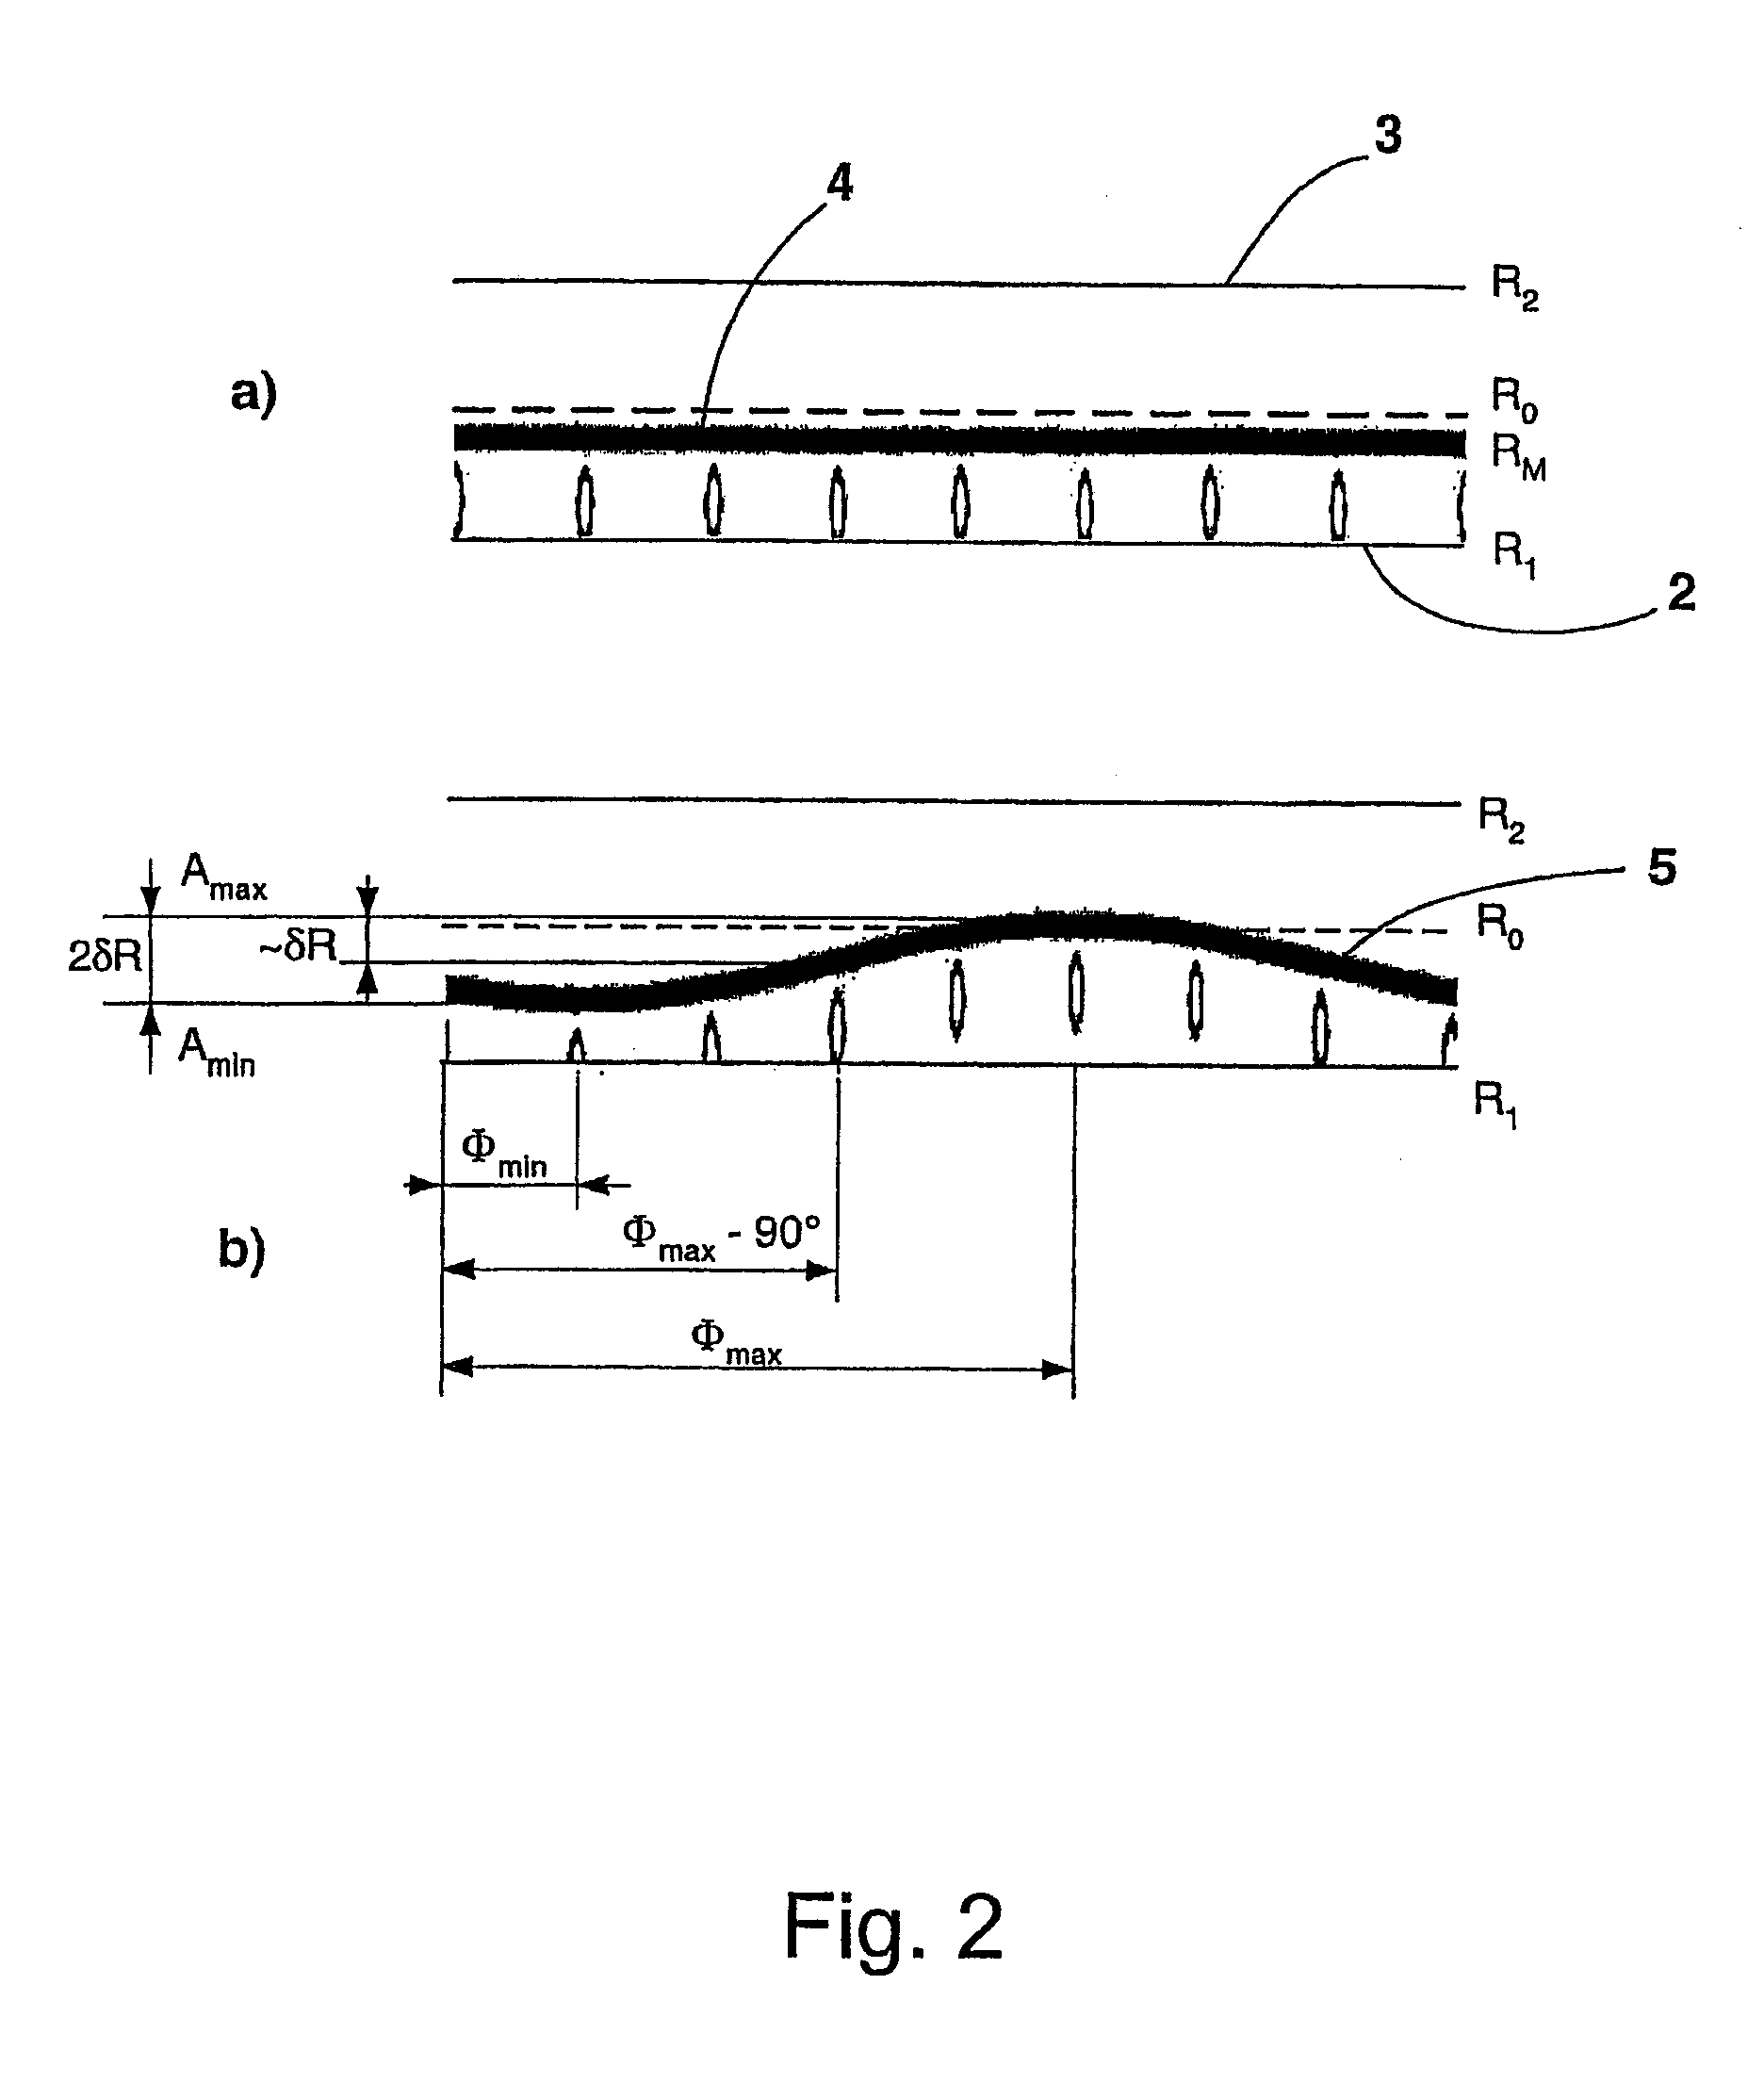 Method for Determining the Exact Center of a Coin Introduced into a Coin Acceptor Unit